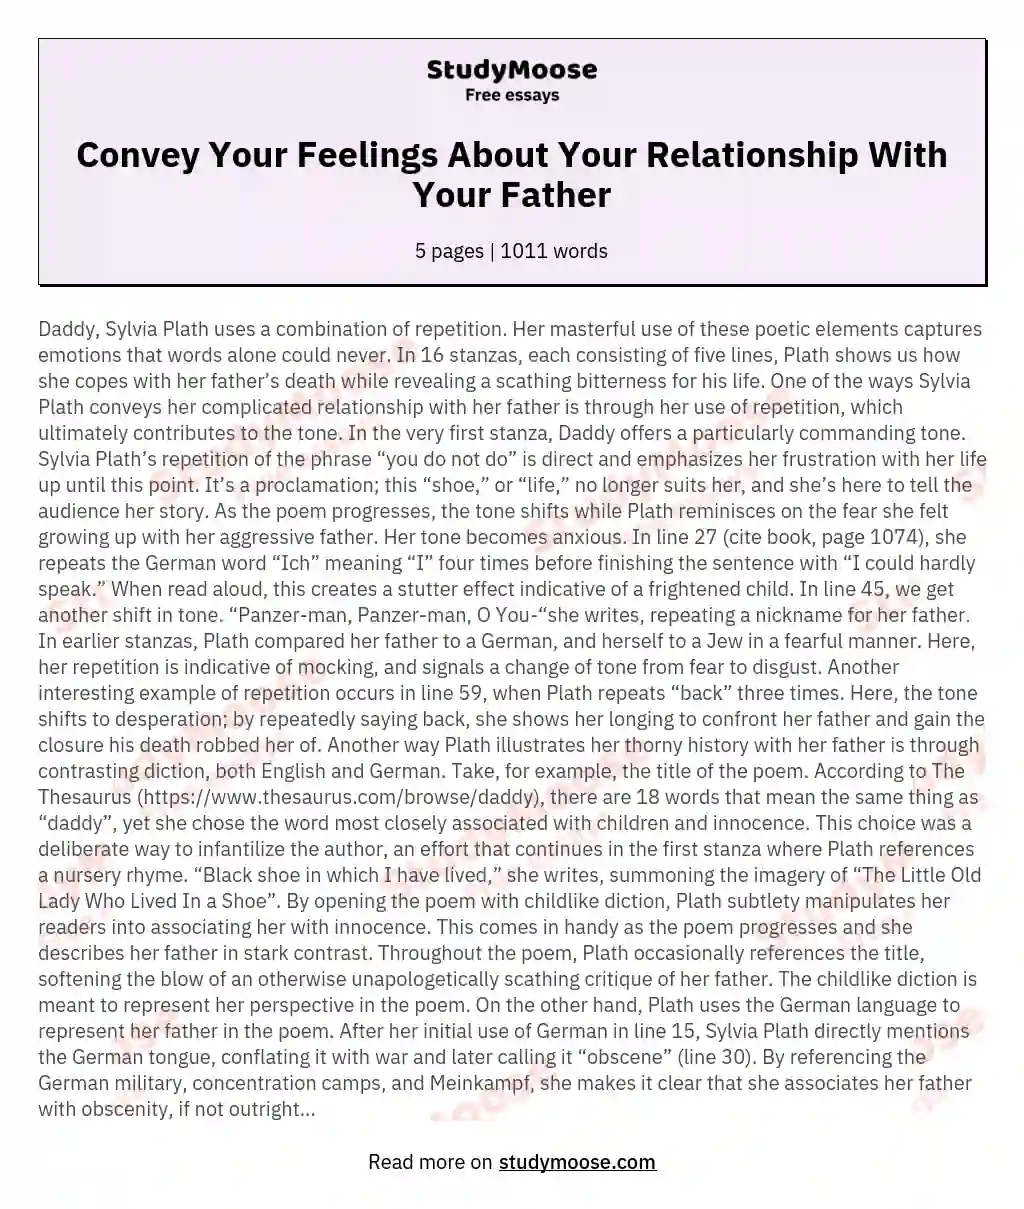 Convey Your Feelings About Your Relationship With Your Father essay